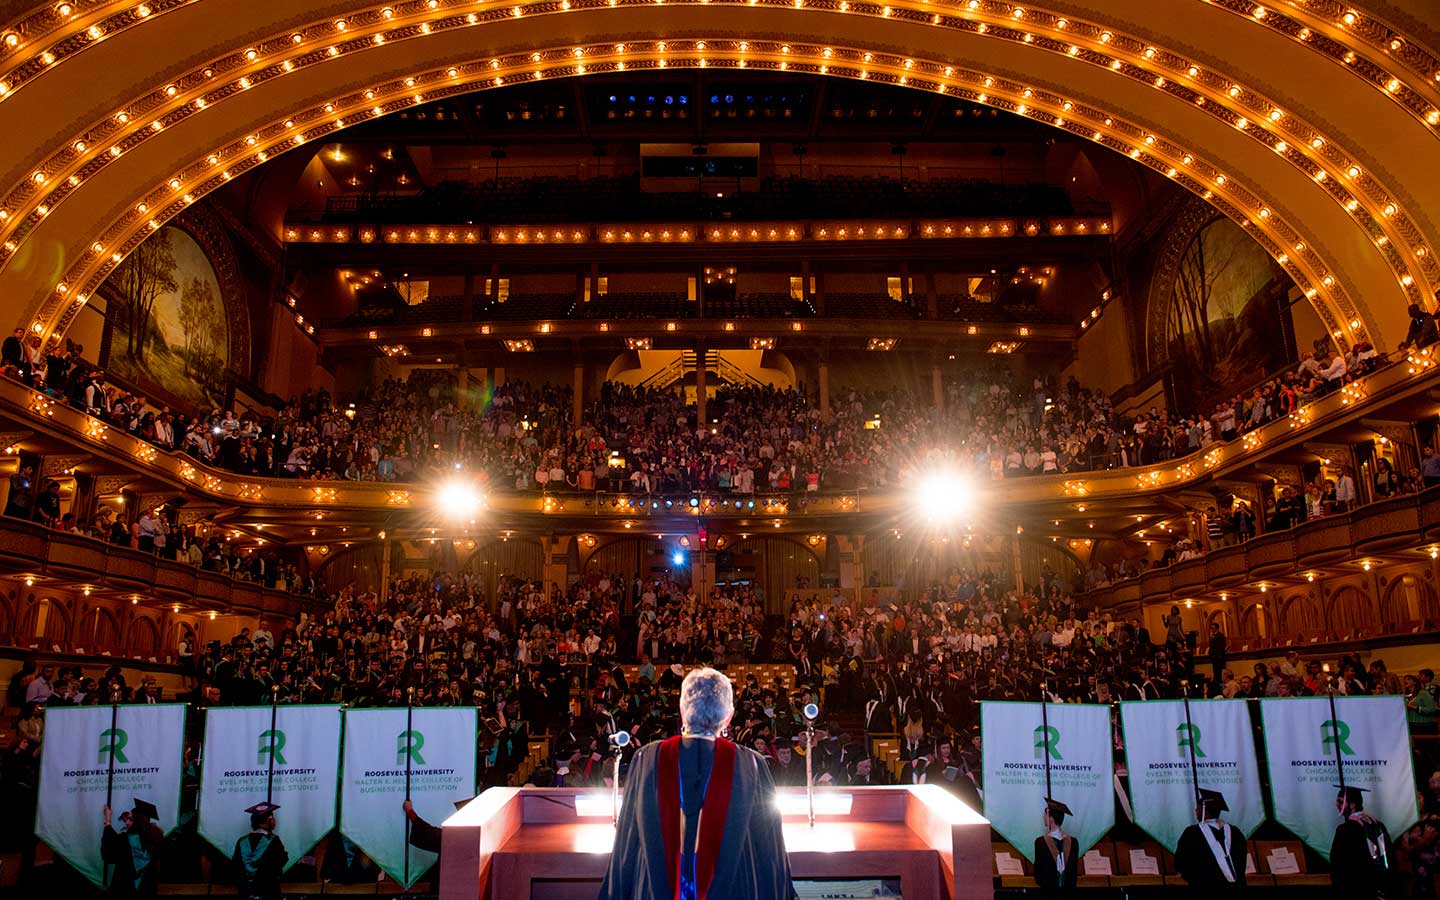 Auditorium Theatre from stage during commencement